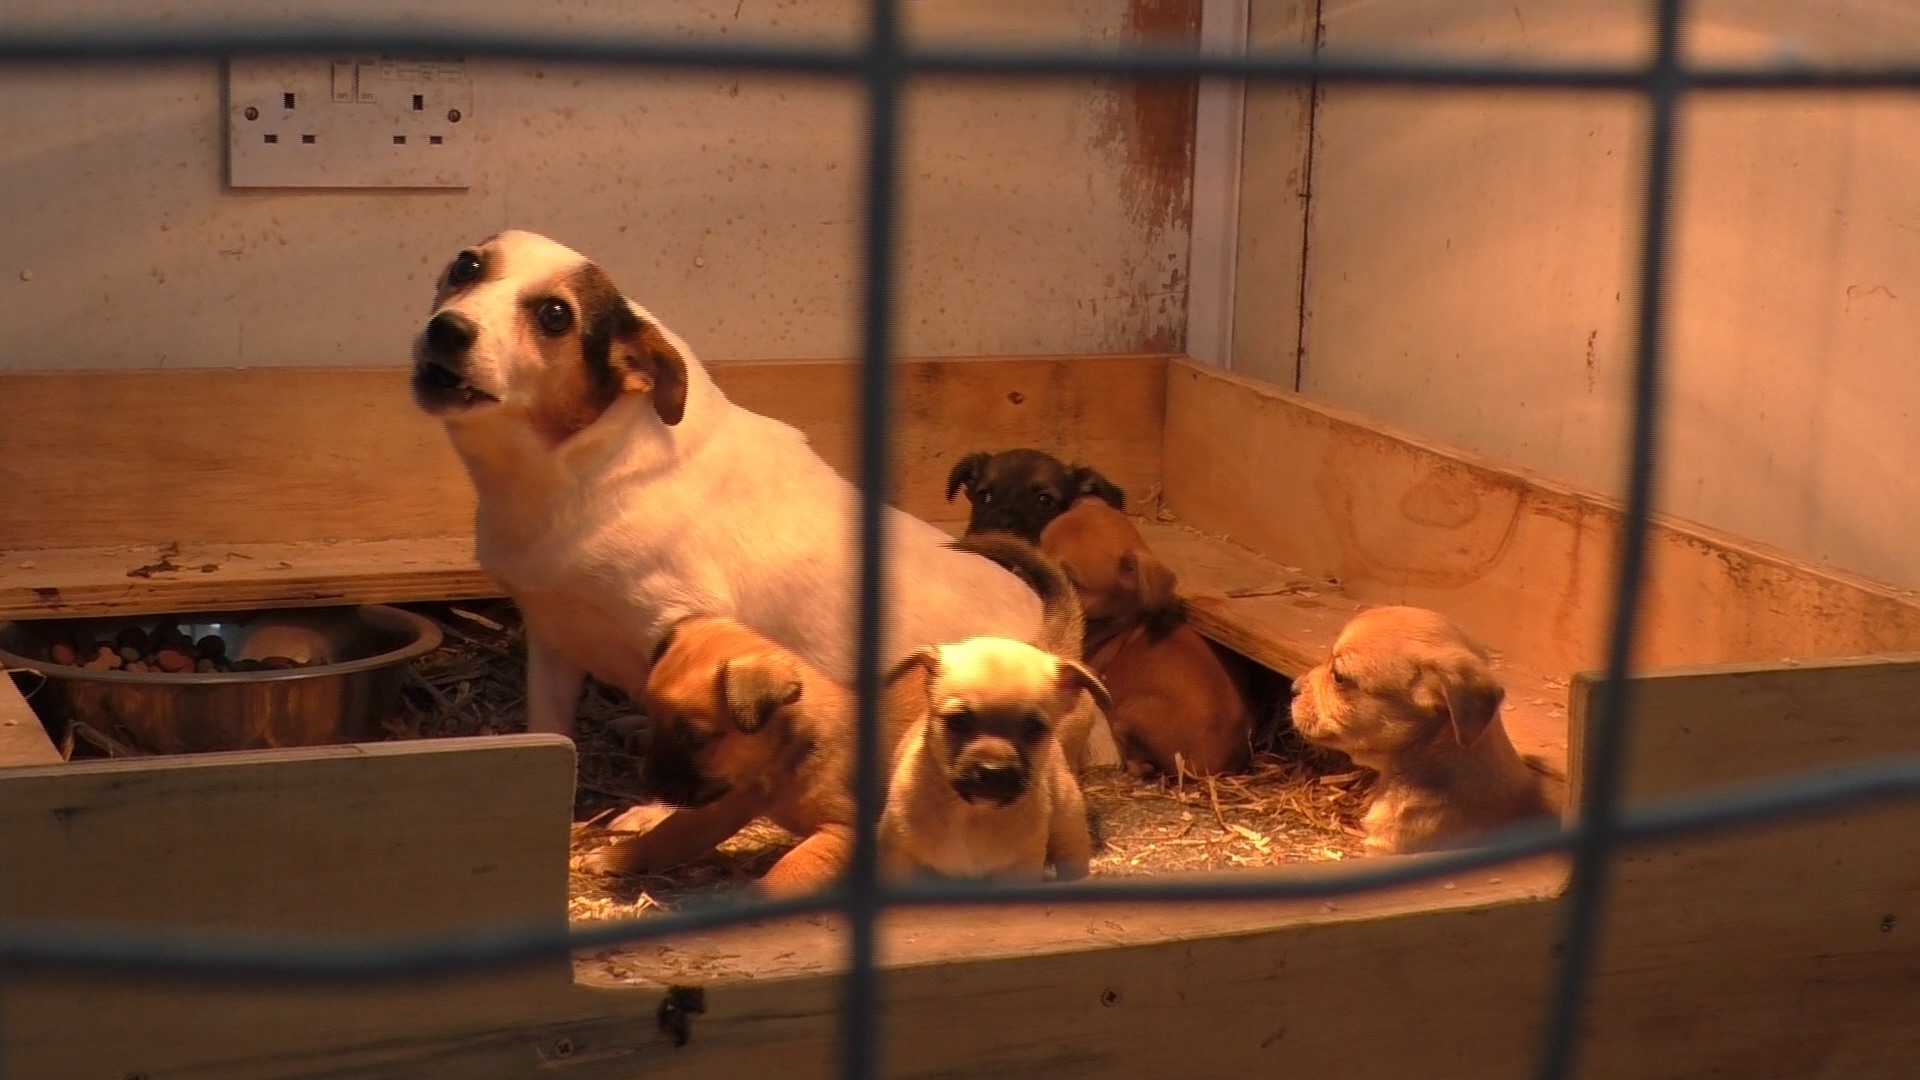 More than 750 calls were made to the Scottish SPCA last year regarding illegal breeders.